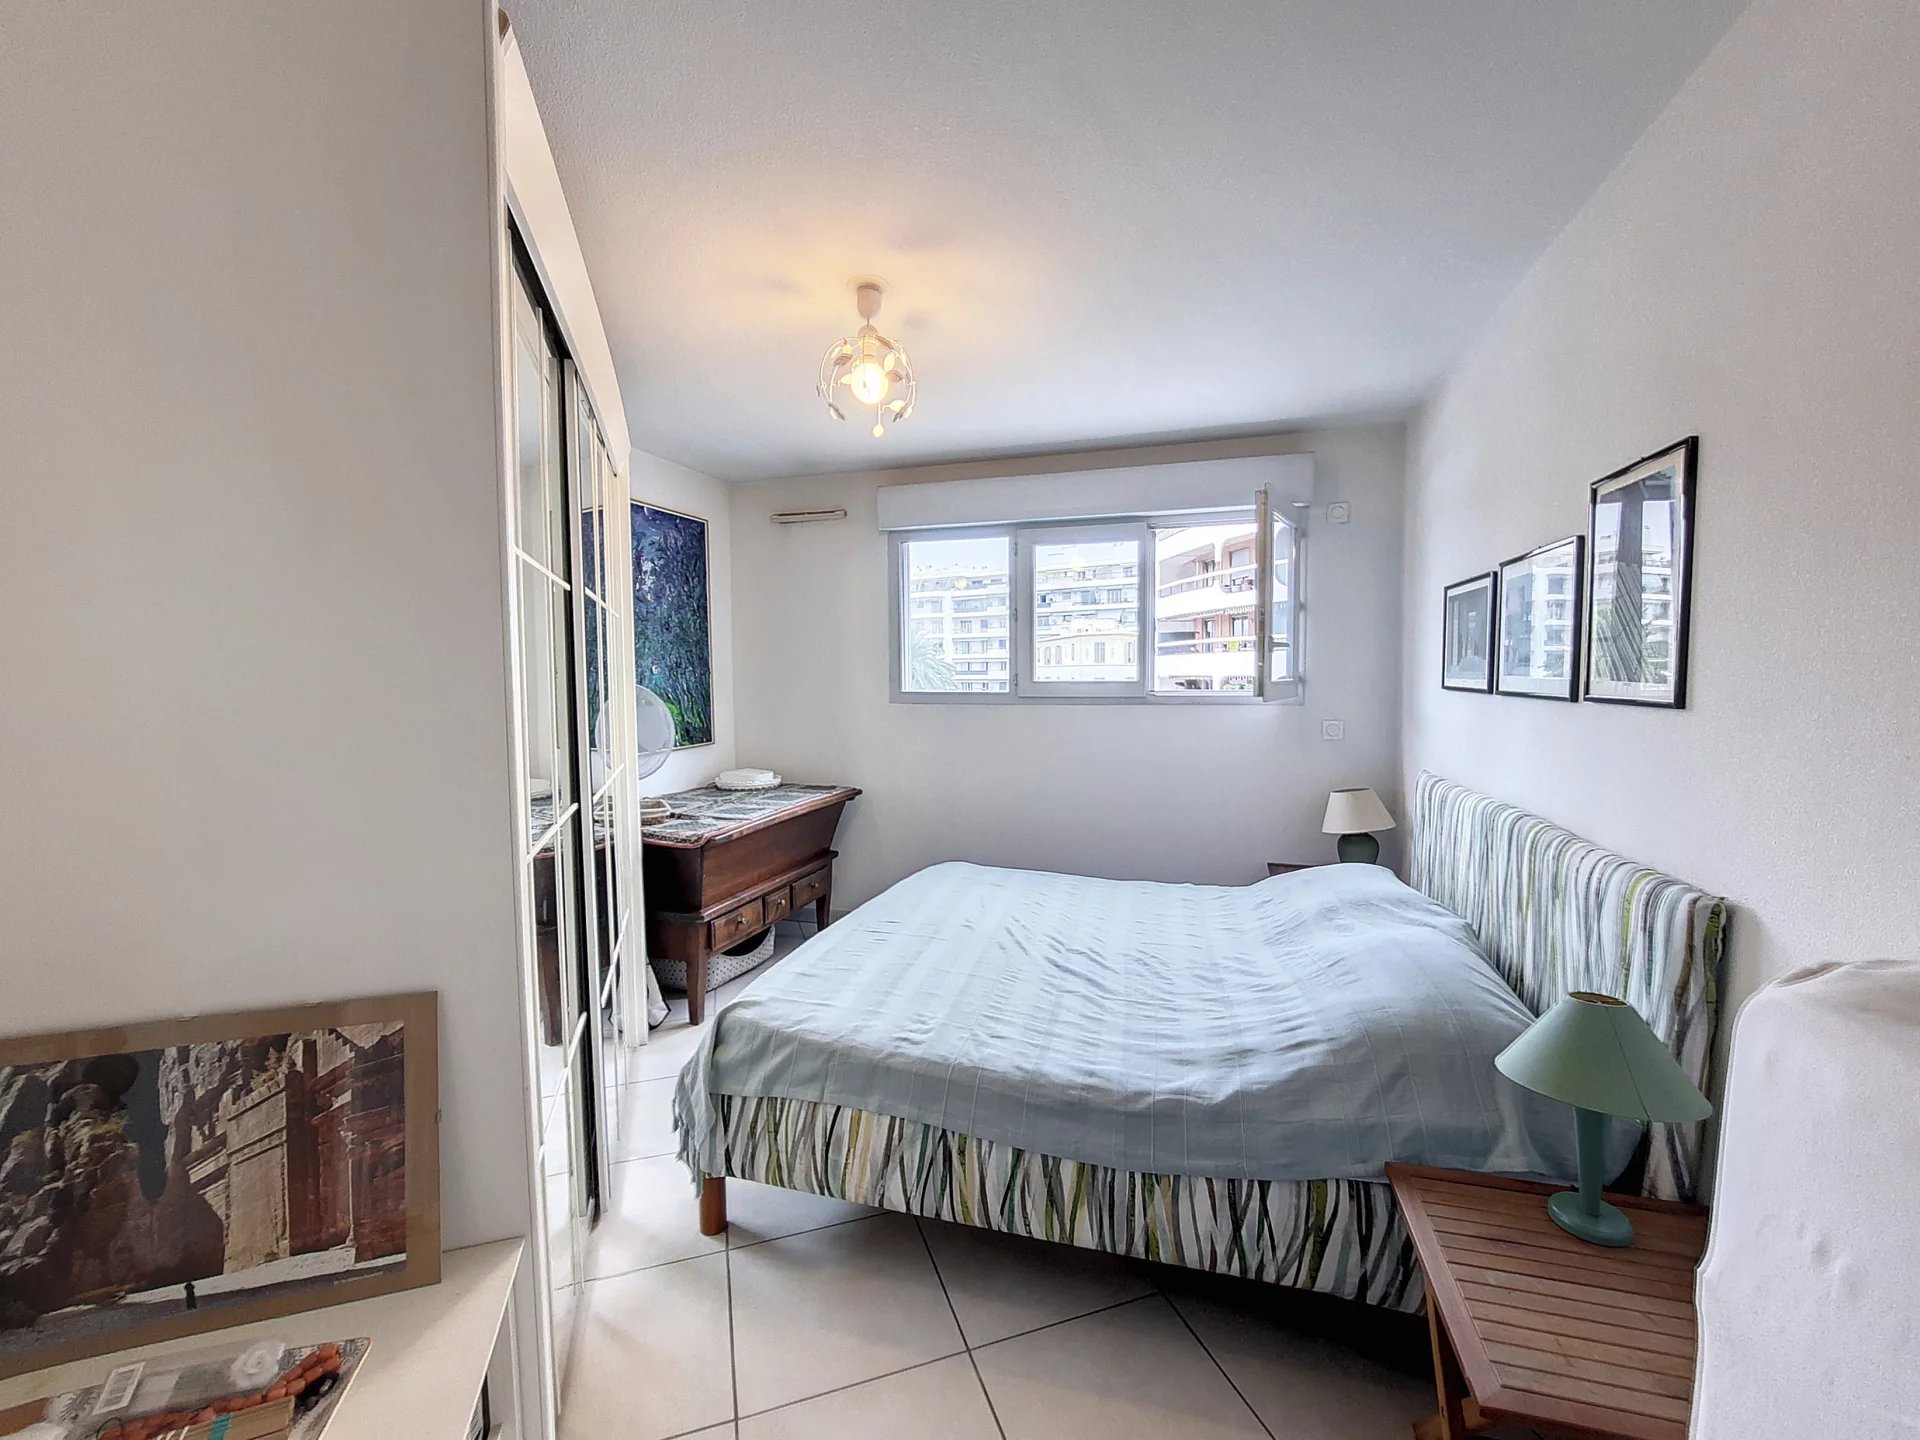 3-ROOM TOWN CENTRE FLAT